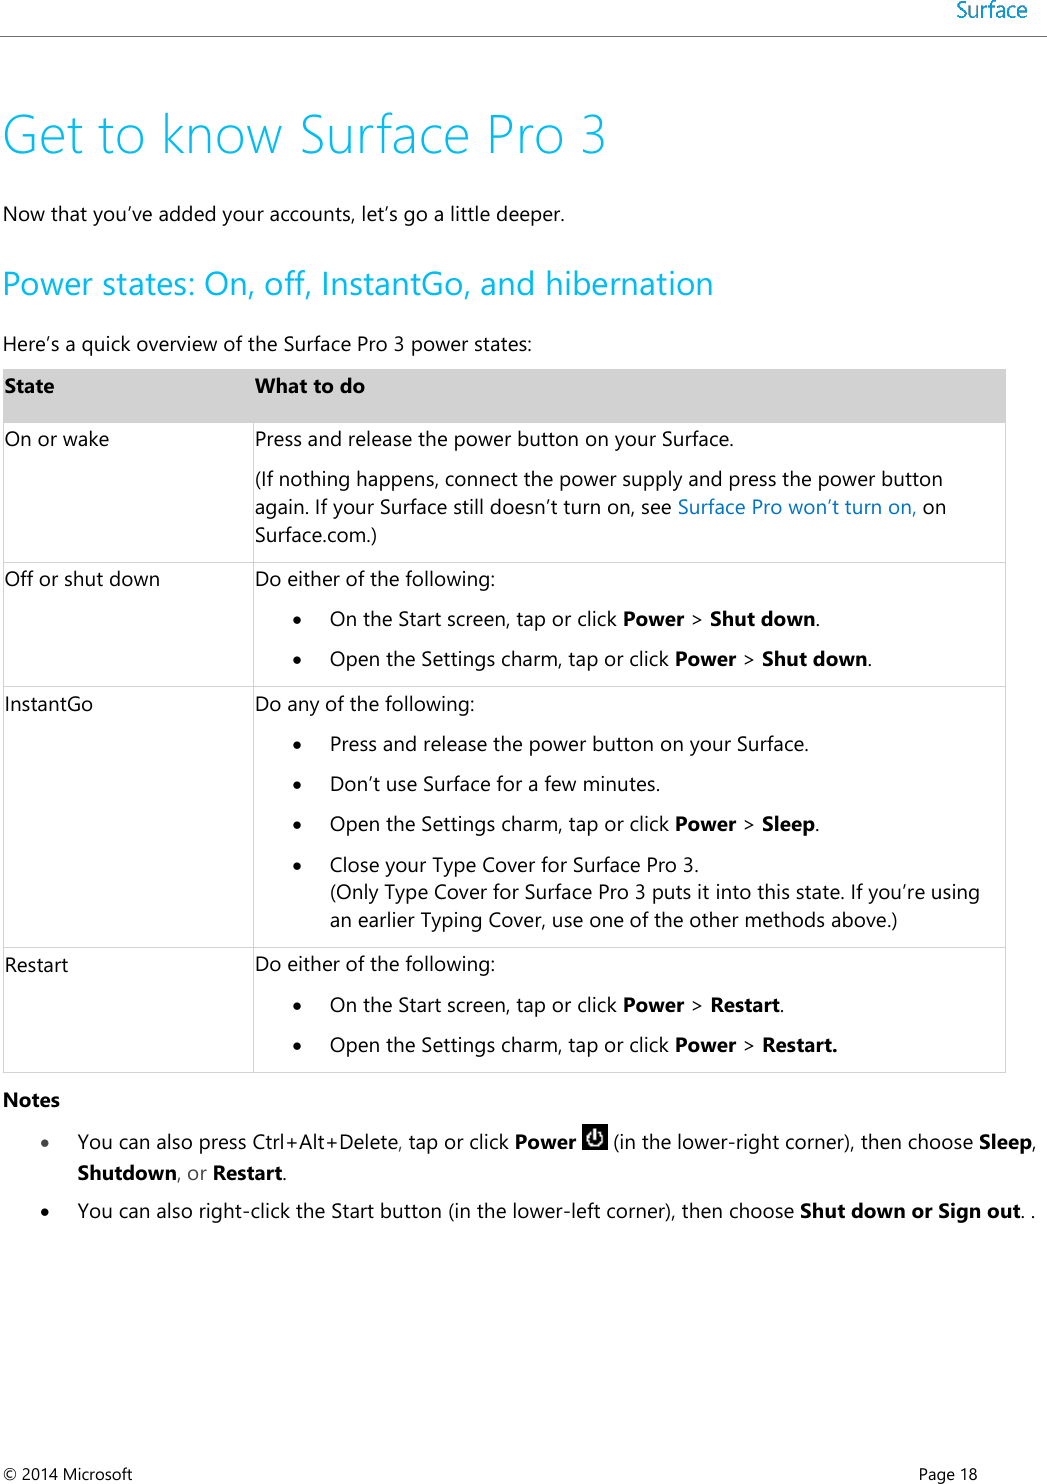  © 2014 Microsoft      Page 18  Get to know Surface Pro 3 Now that you’ve added your accounts, let’s go a little deeper.  Power states: On, off, InstantGo, and hibernation Here’s a quick overview of the Surface Pro 3 power states:  State What to do On or wake Press and release the power button on your Surface. (If nothing happens, connect the power supply and press the power button again. If your Surface still doesn’t turn on, see Surface Pro won’t turn on, on Surface.com.) Off or shut down Do either of the following:  On the Start screen, tap or click Power &gt; Shut down.  Open the Settings charm, tap or click Power &gt; Shut down. InstantGo Do any of the following:   Press and release the power button on your Surface.  Don’t use Surface for a few minutes.  Open the Settings charm, tap or click Power &gt; Sleep.   Close your Type Cover for Surface Pro 3. (Only Type Cover for Surface Pro 3 puts it into this state. If you’re using an earlier Typing Cover, use one of the other methods above.) Restart Do either of the following:  On the Start screen, tap or click Power &gt; Restart.  Open the Settings charm, tap or click Power &gt; Restart. Notes  You can also press Ctrl+Alt+Delete, tap or click Power   (in the lower-right corner), then choose Sleep, Shutdown, or Restart.  You can also right-click the Start button (in the lower-left corner), then choose Shut down or Sign out. . 